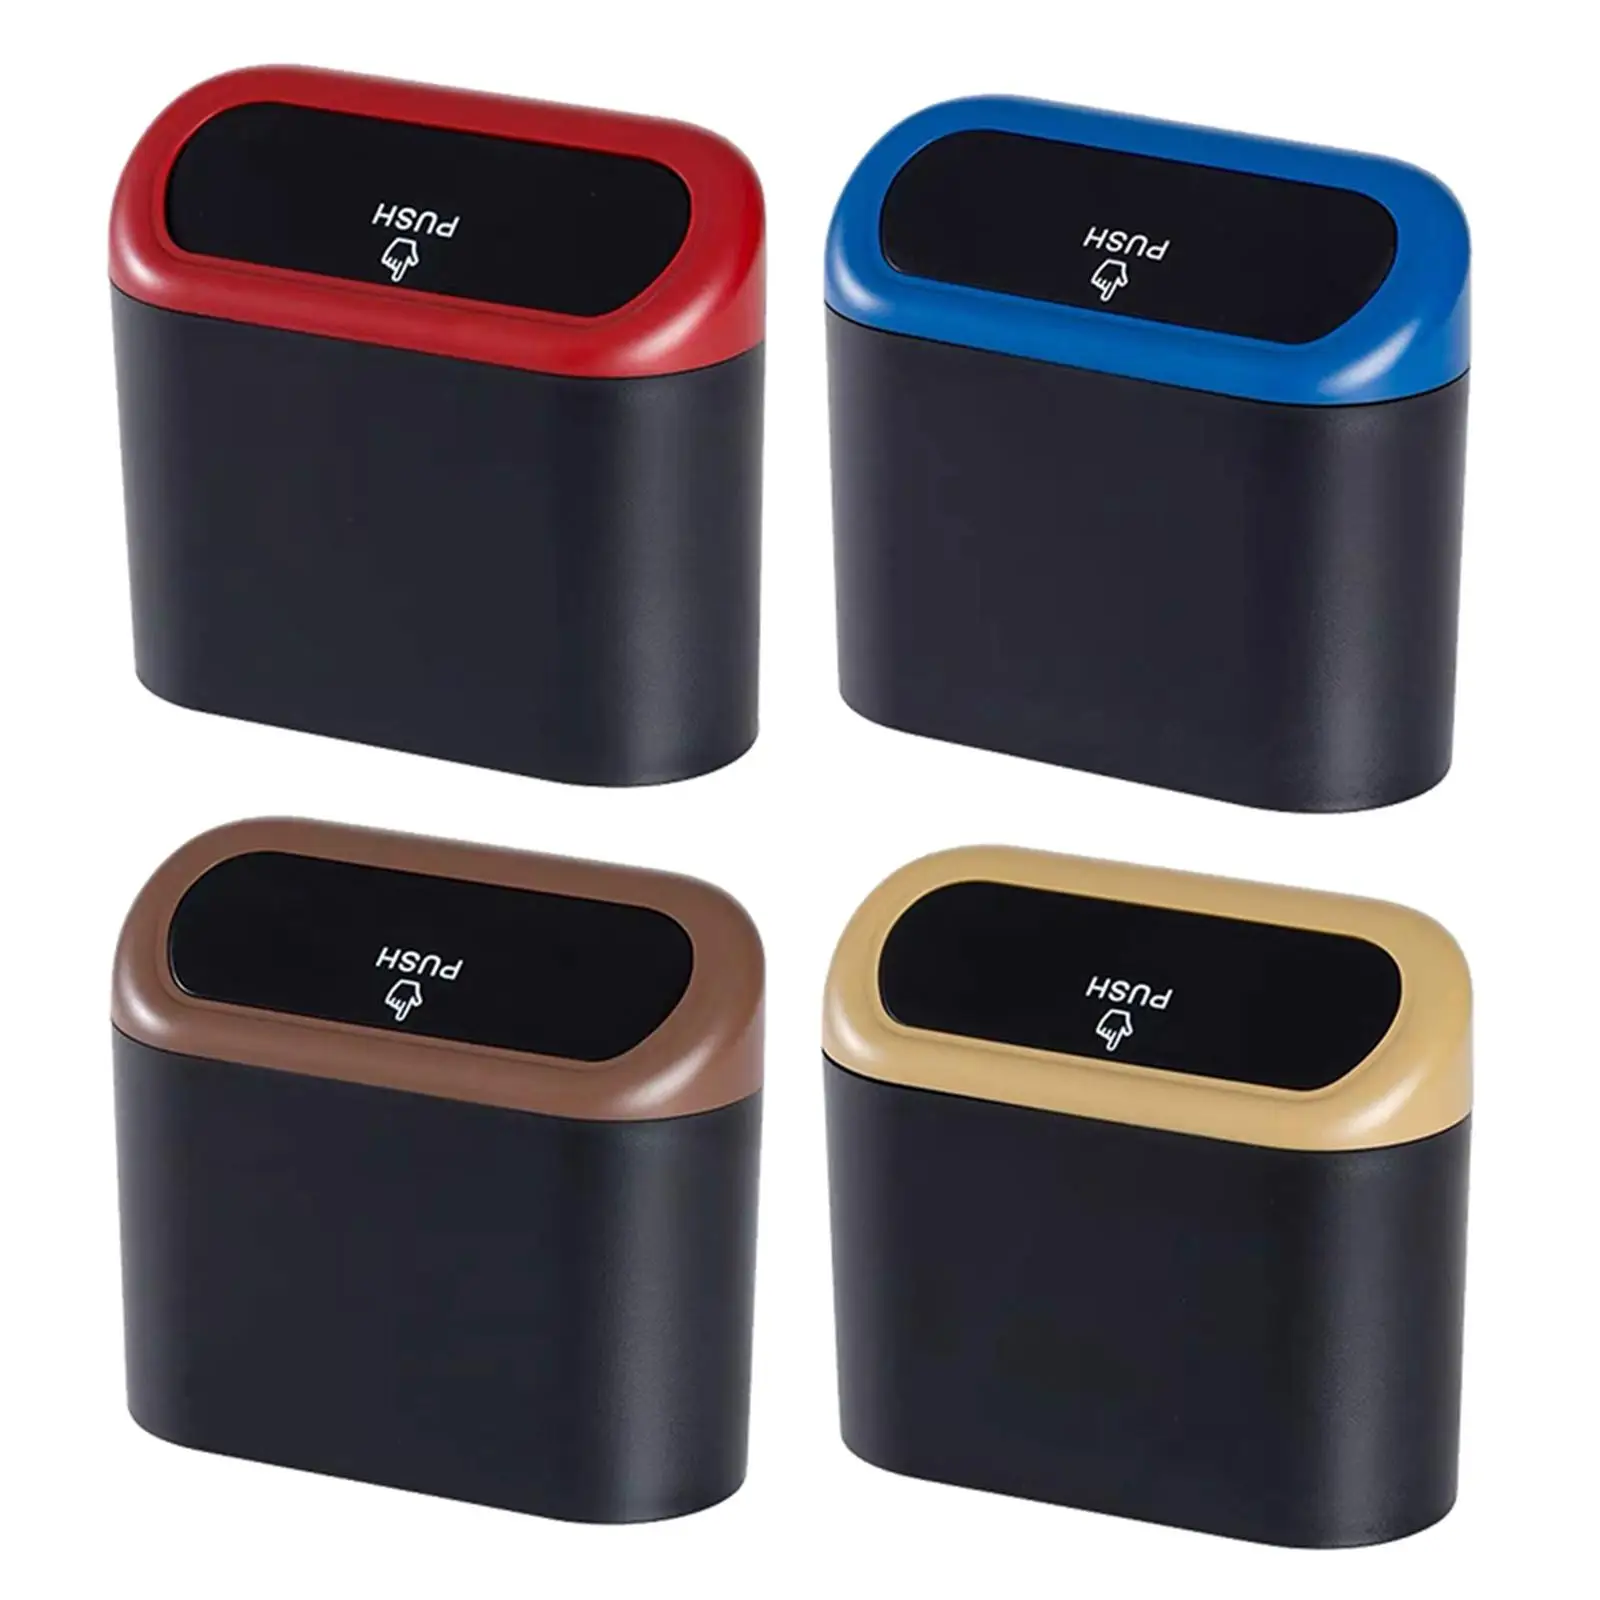 Mini Car Trash Can with Lid Trash Container Hanging Pressing Trash Bin Fits for Home Office Sofa Travel Waste Storage Trash Cans